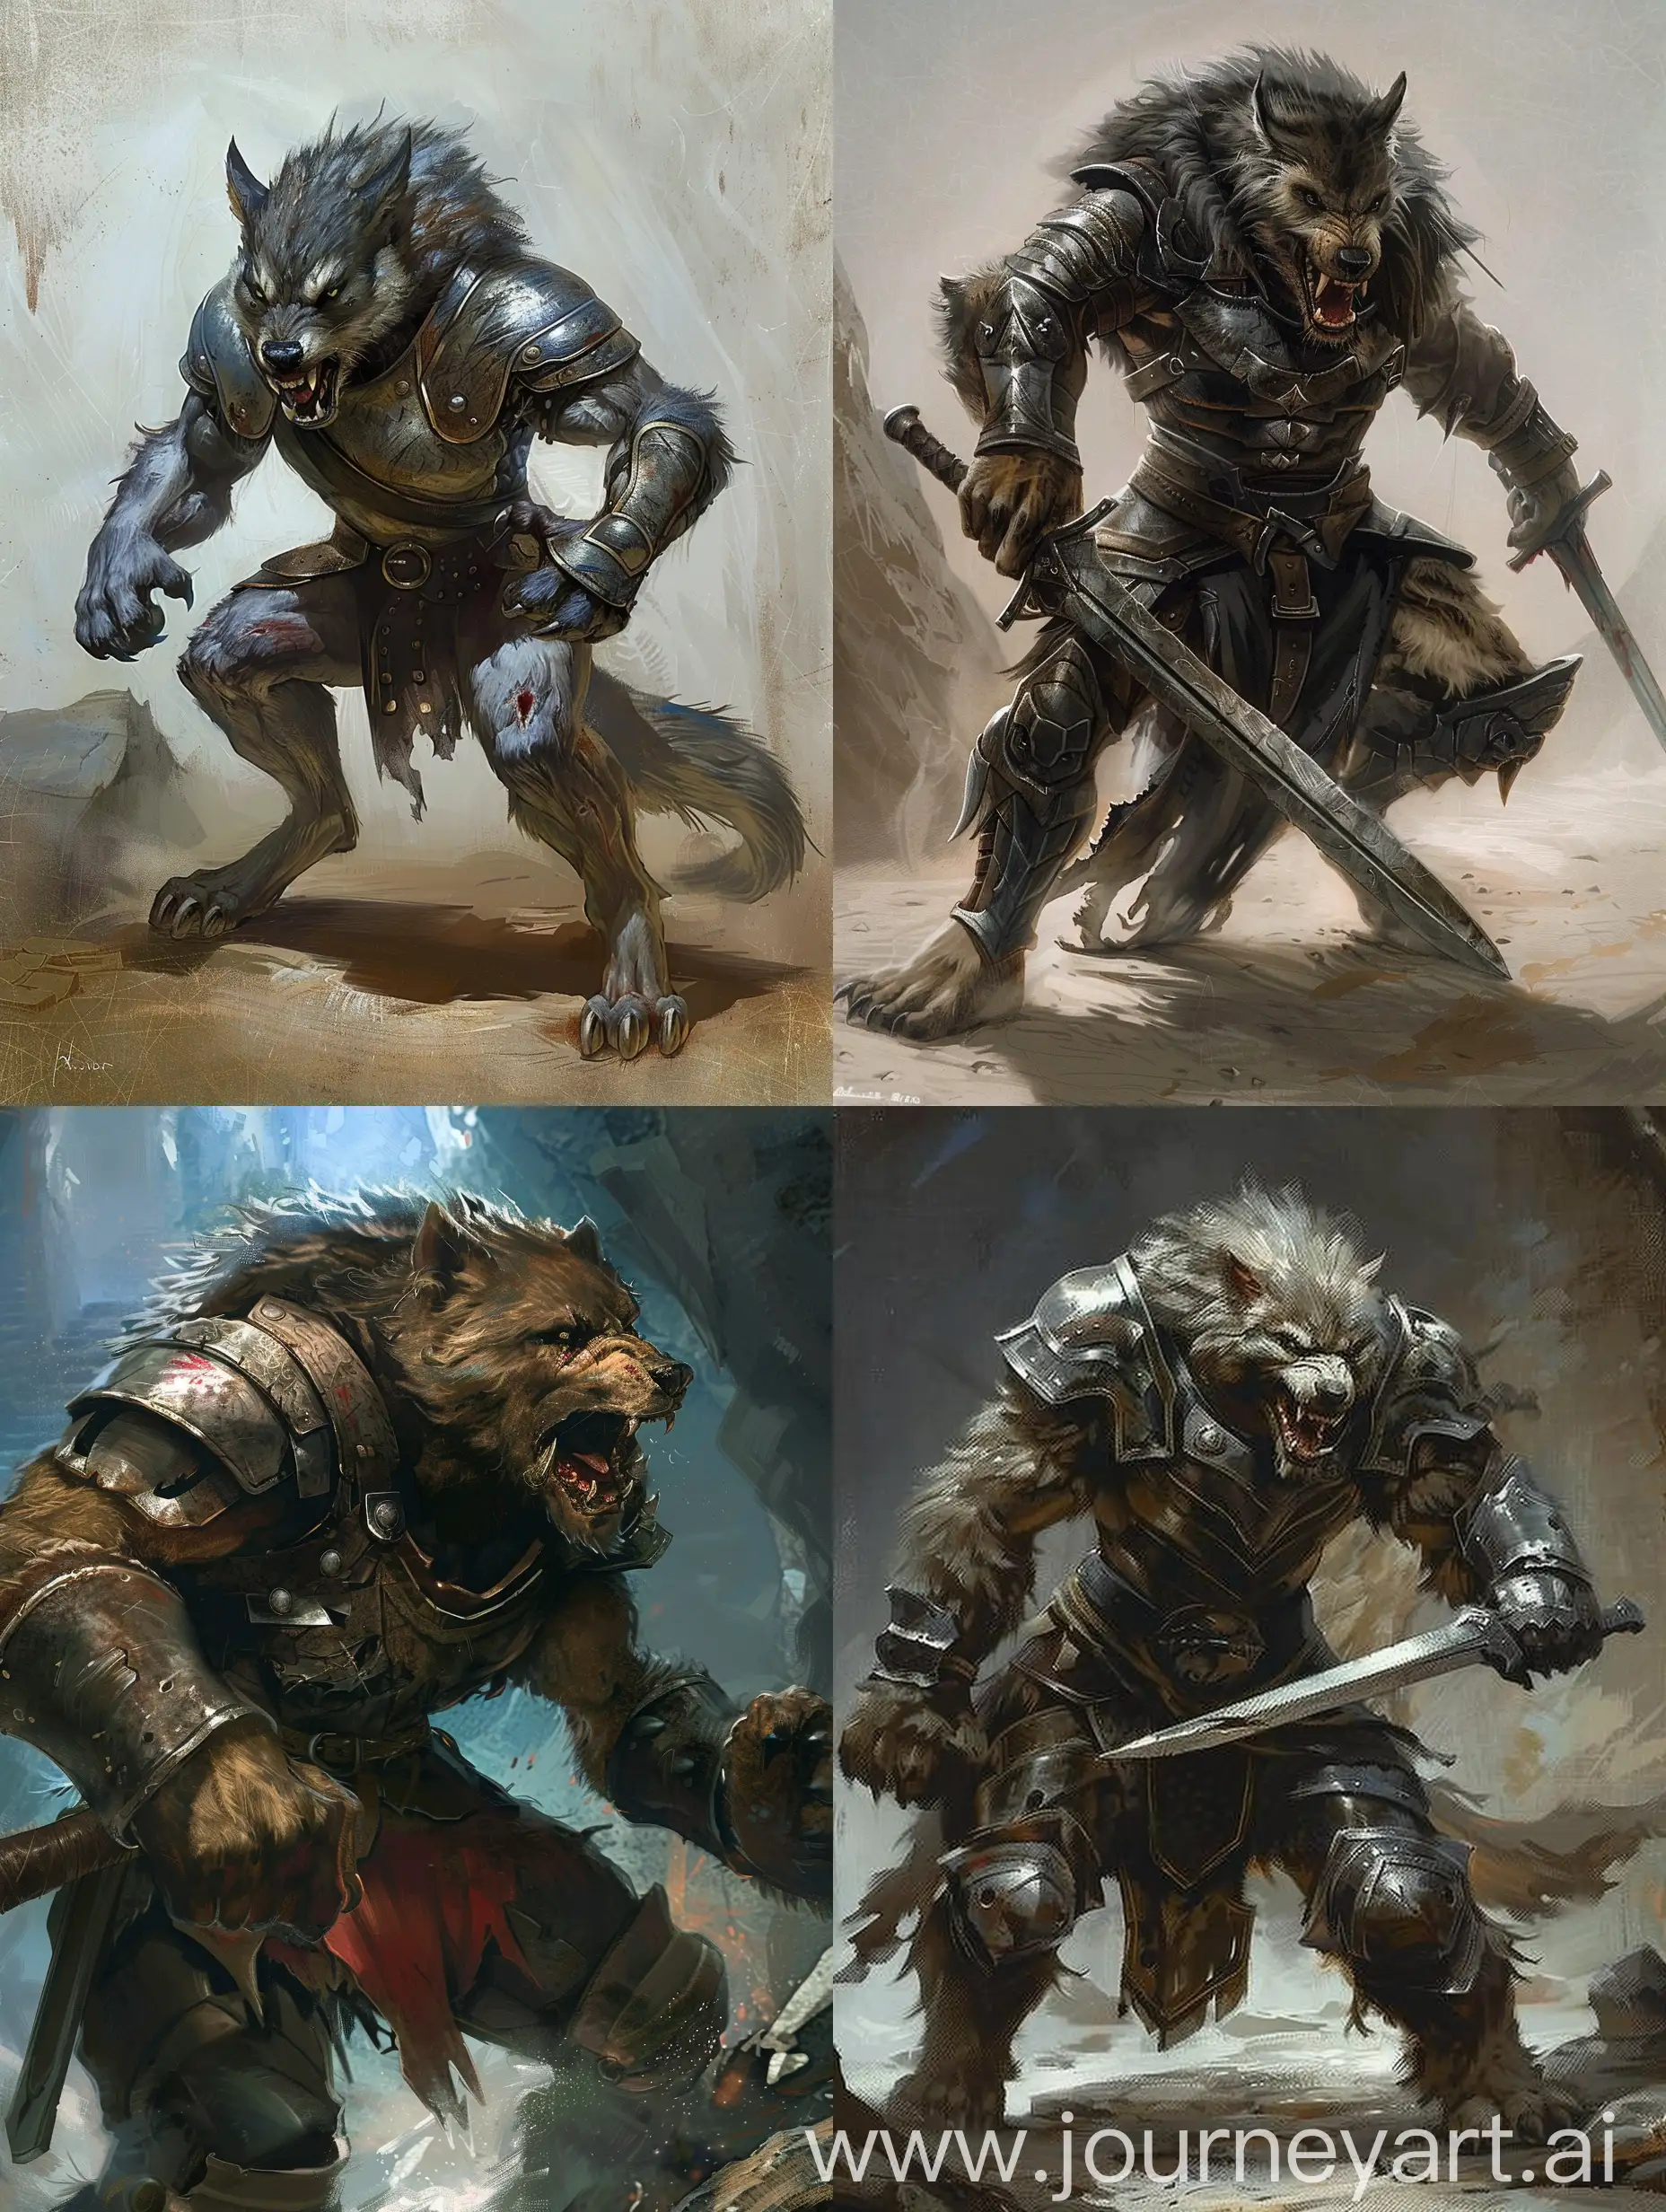 Fierce-Lycanthropes-in-Epic-Battle-Clad-in-Durable-Armor